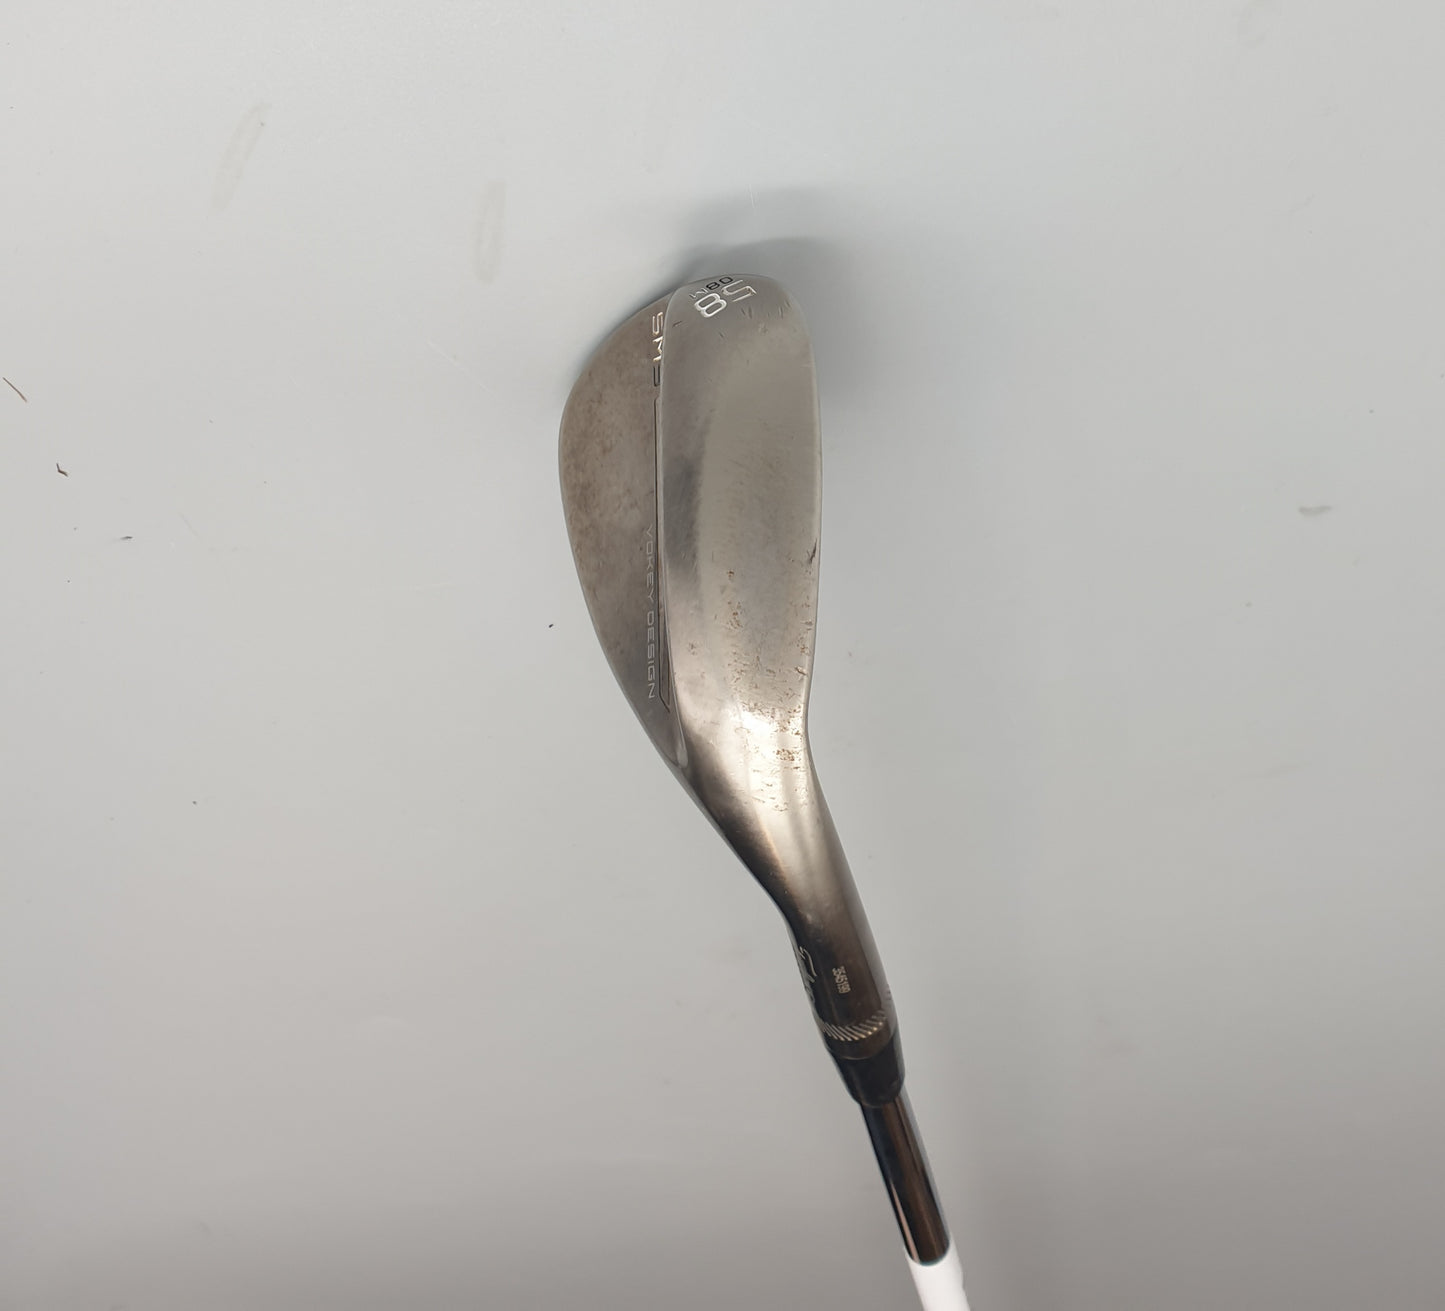 Titleist Vokey SM9 58.08M Brushed Steel Right Hand - USED